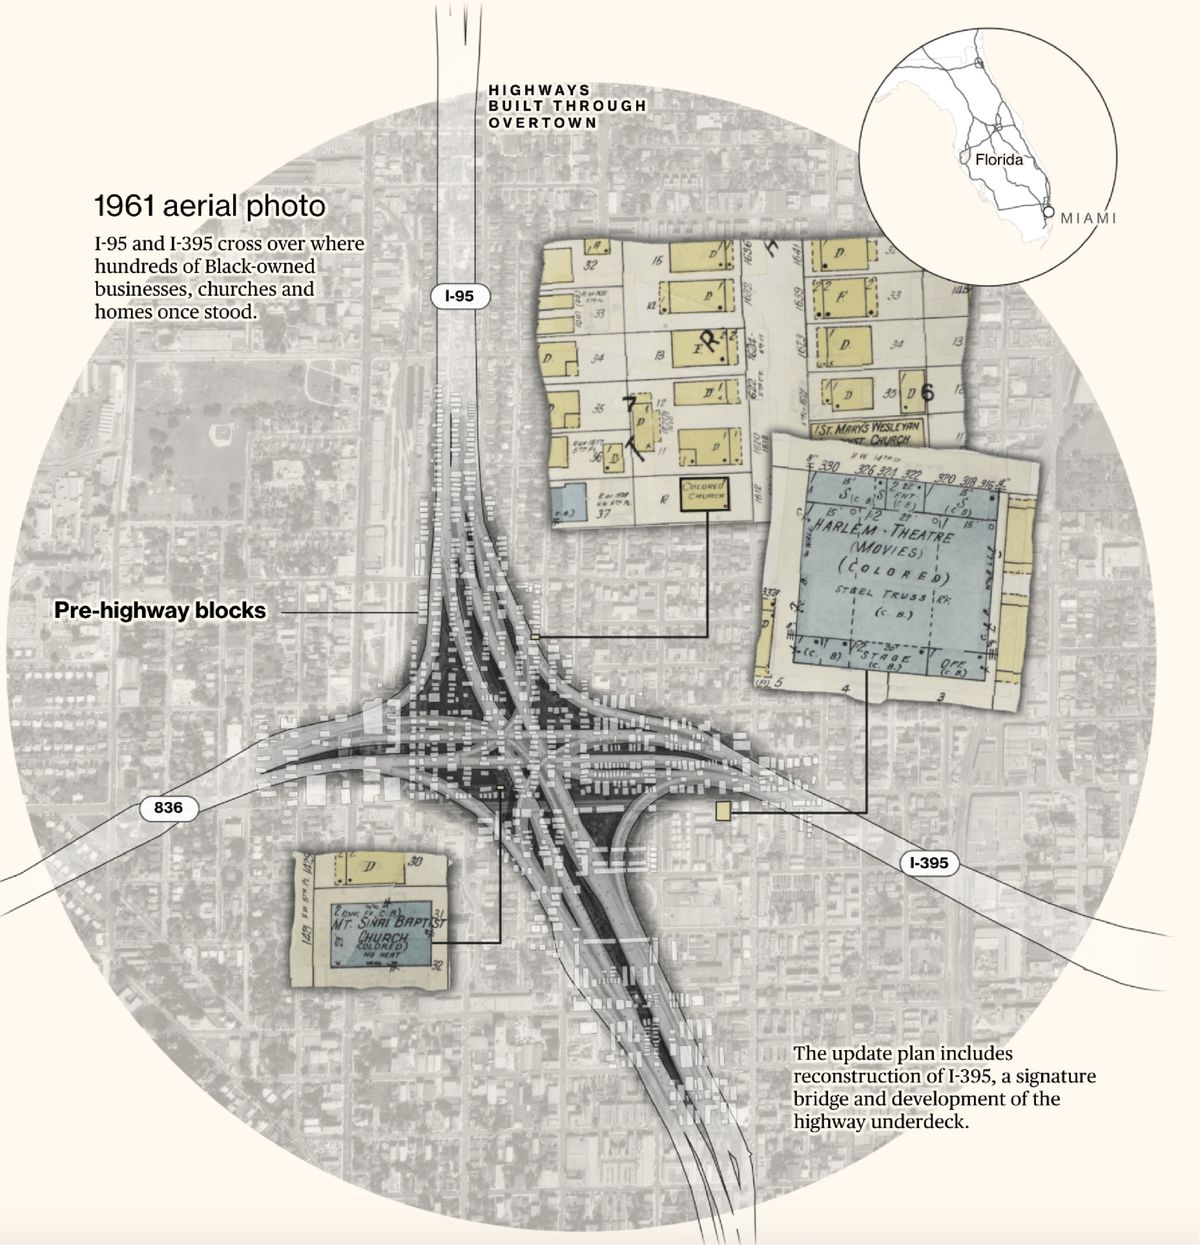 MapLab: Visualizing the Racial Injustice of U.S. Highways